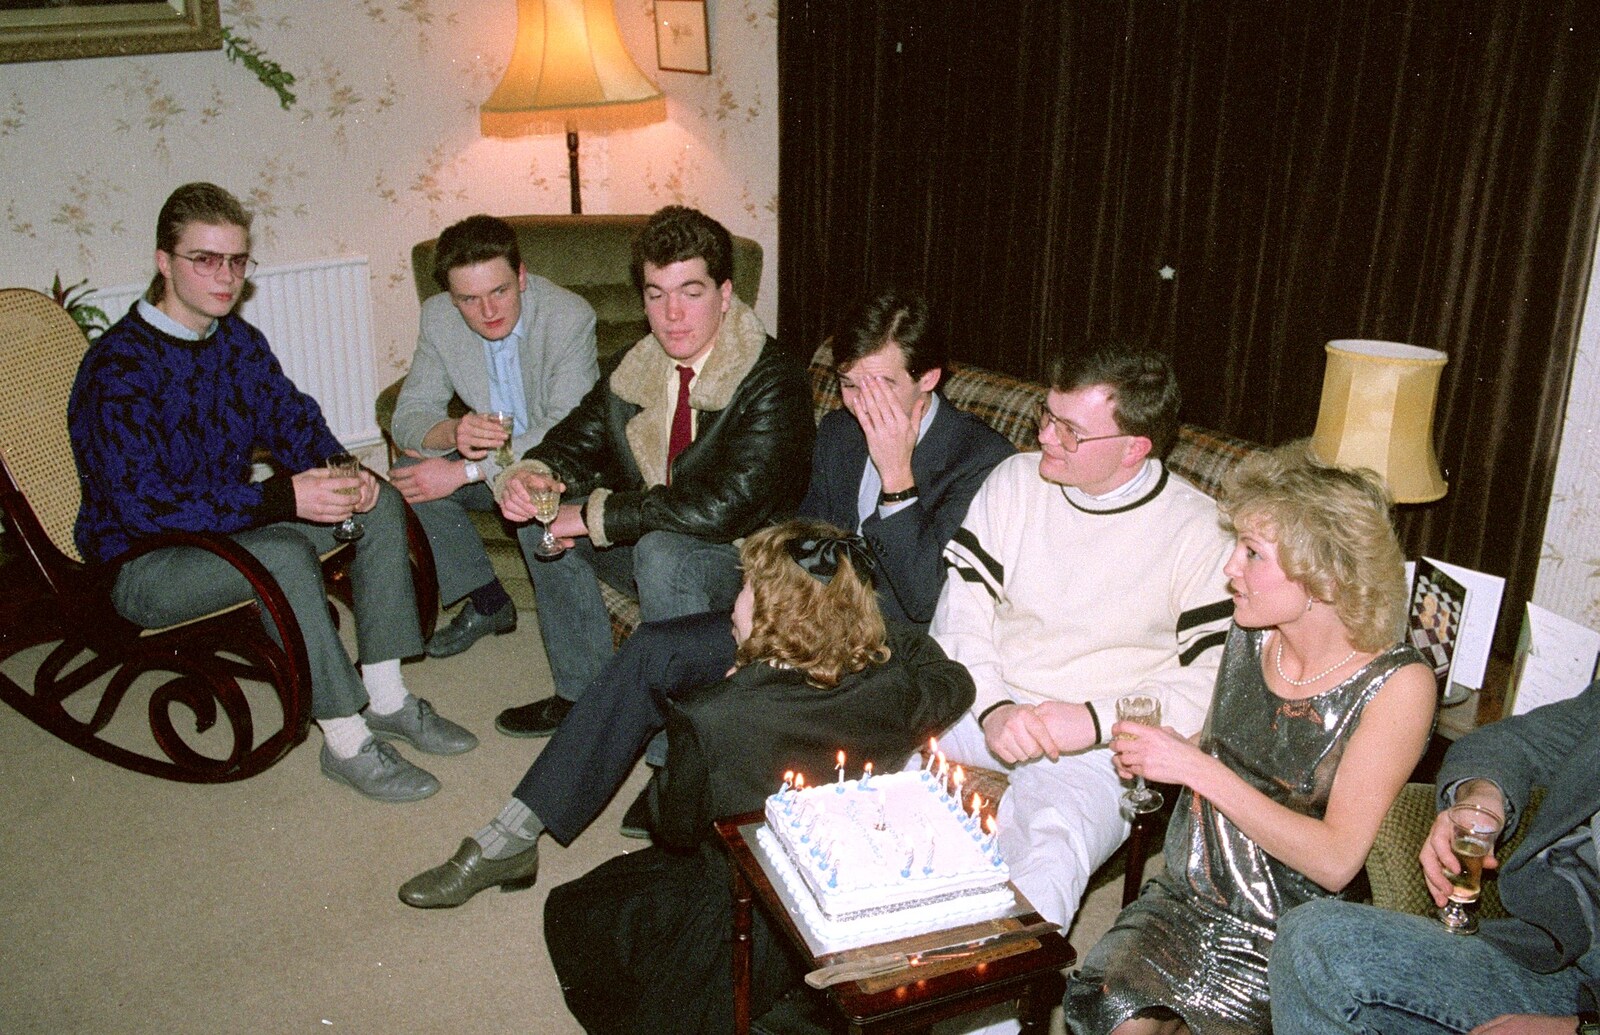 Simon, Kevin, Jon, Phil, Hamish and Laura from Hamish's 21st and Christmas, New Milton and Bransgore - 25th December 1987